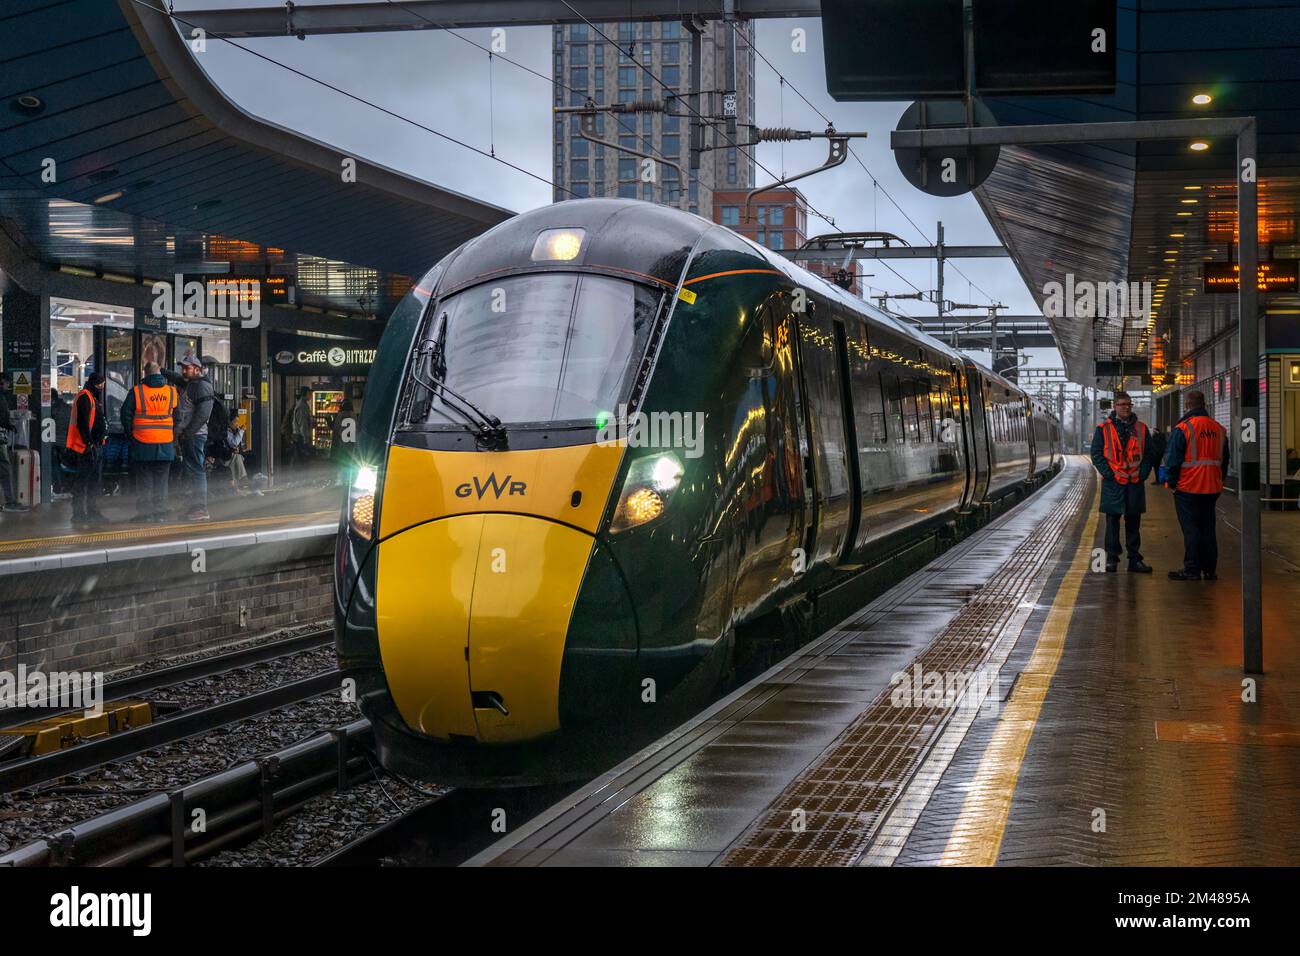 Monday 19th December 2022. Reading Station, Reading, Berkshire, England. Ahead of planned Industrial Action over the Christmas Holiday period, GWR trains run on time with minimal delays but with many carriages full and some travellers having to stand. Credit: Terry Mathews/Alamy Live News Stock Photo